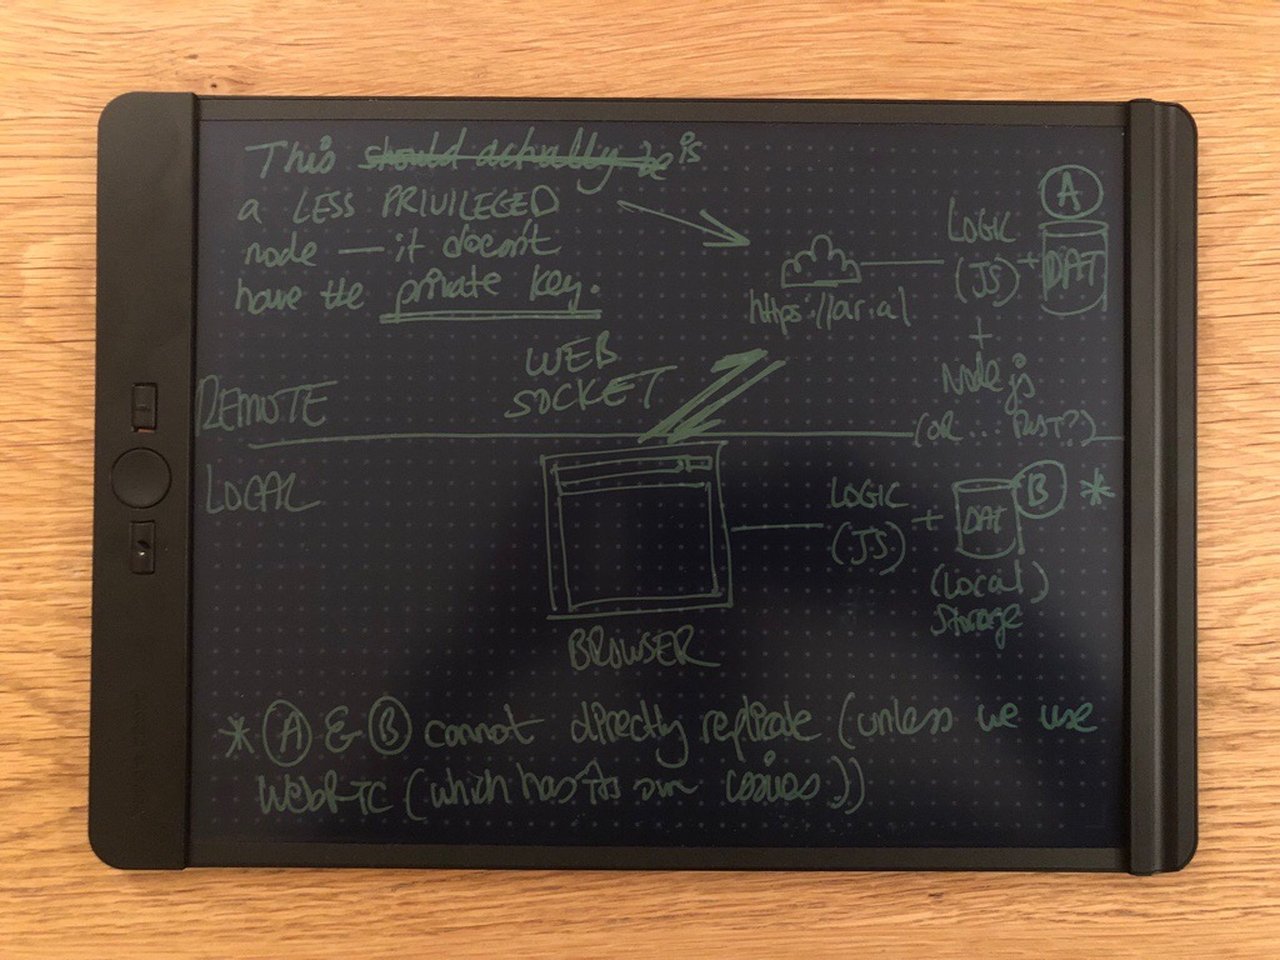 Photo of the Blackboard on a wooden table with some early Hypha plans on it in green text.